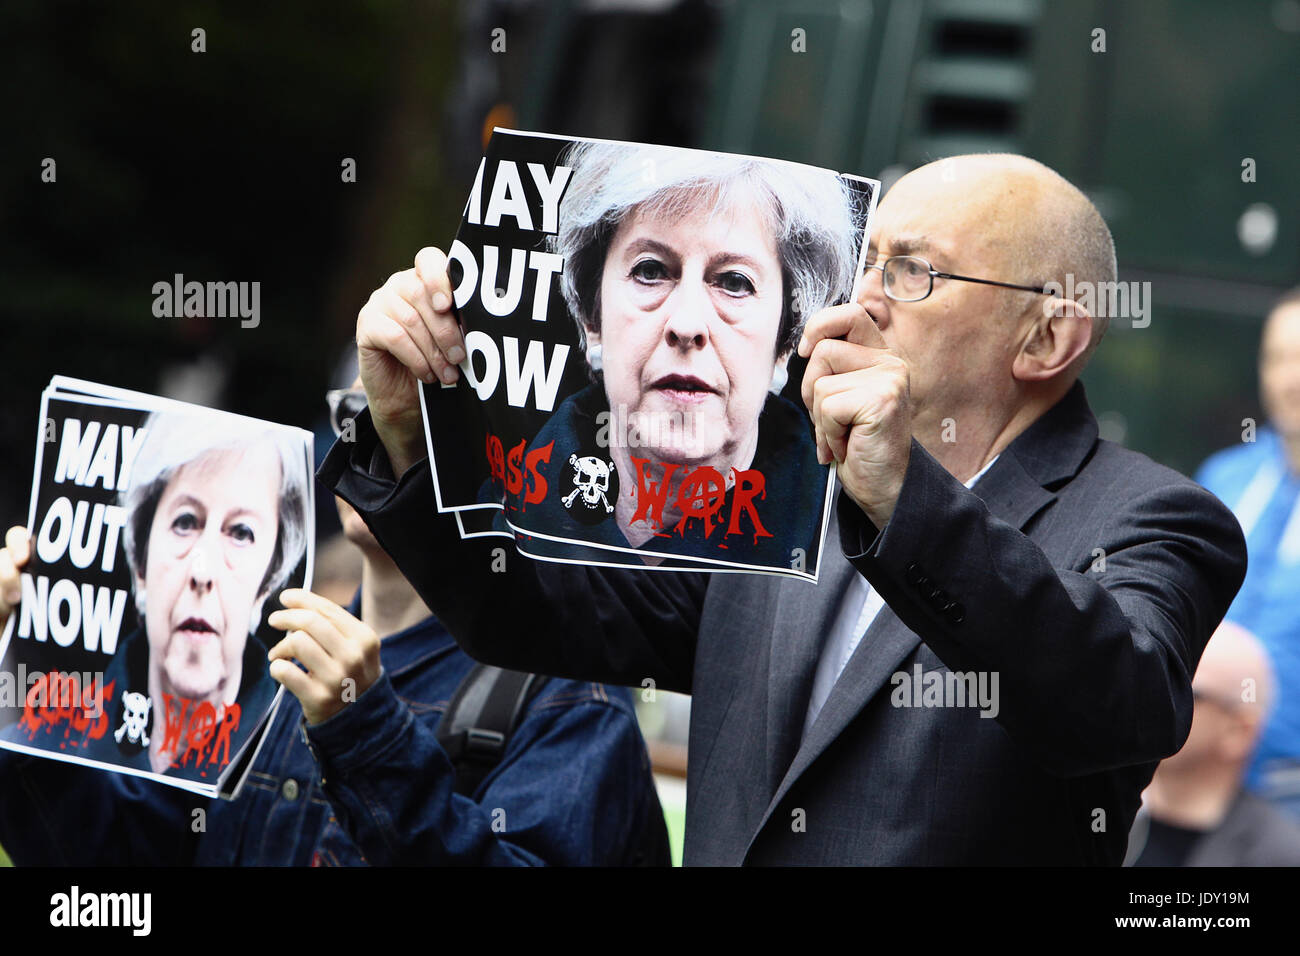 Law & Order, Protester in Westminster holding anti Theresa May poster 2017, London, England. Stock Photo